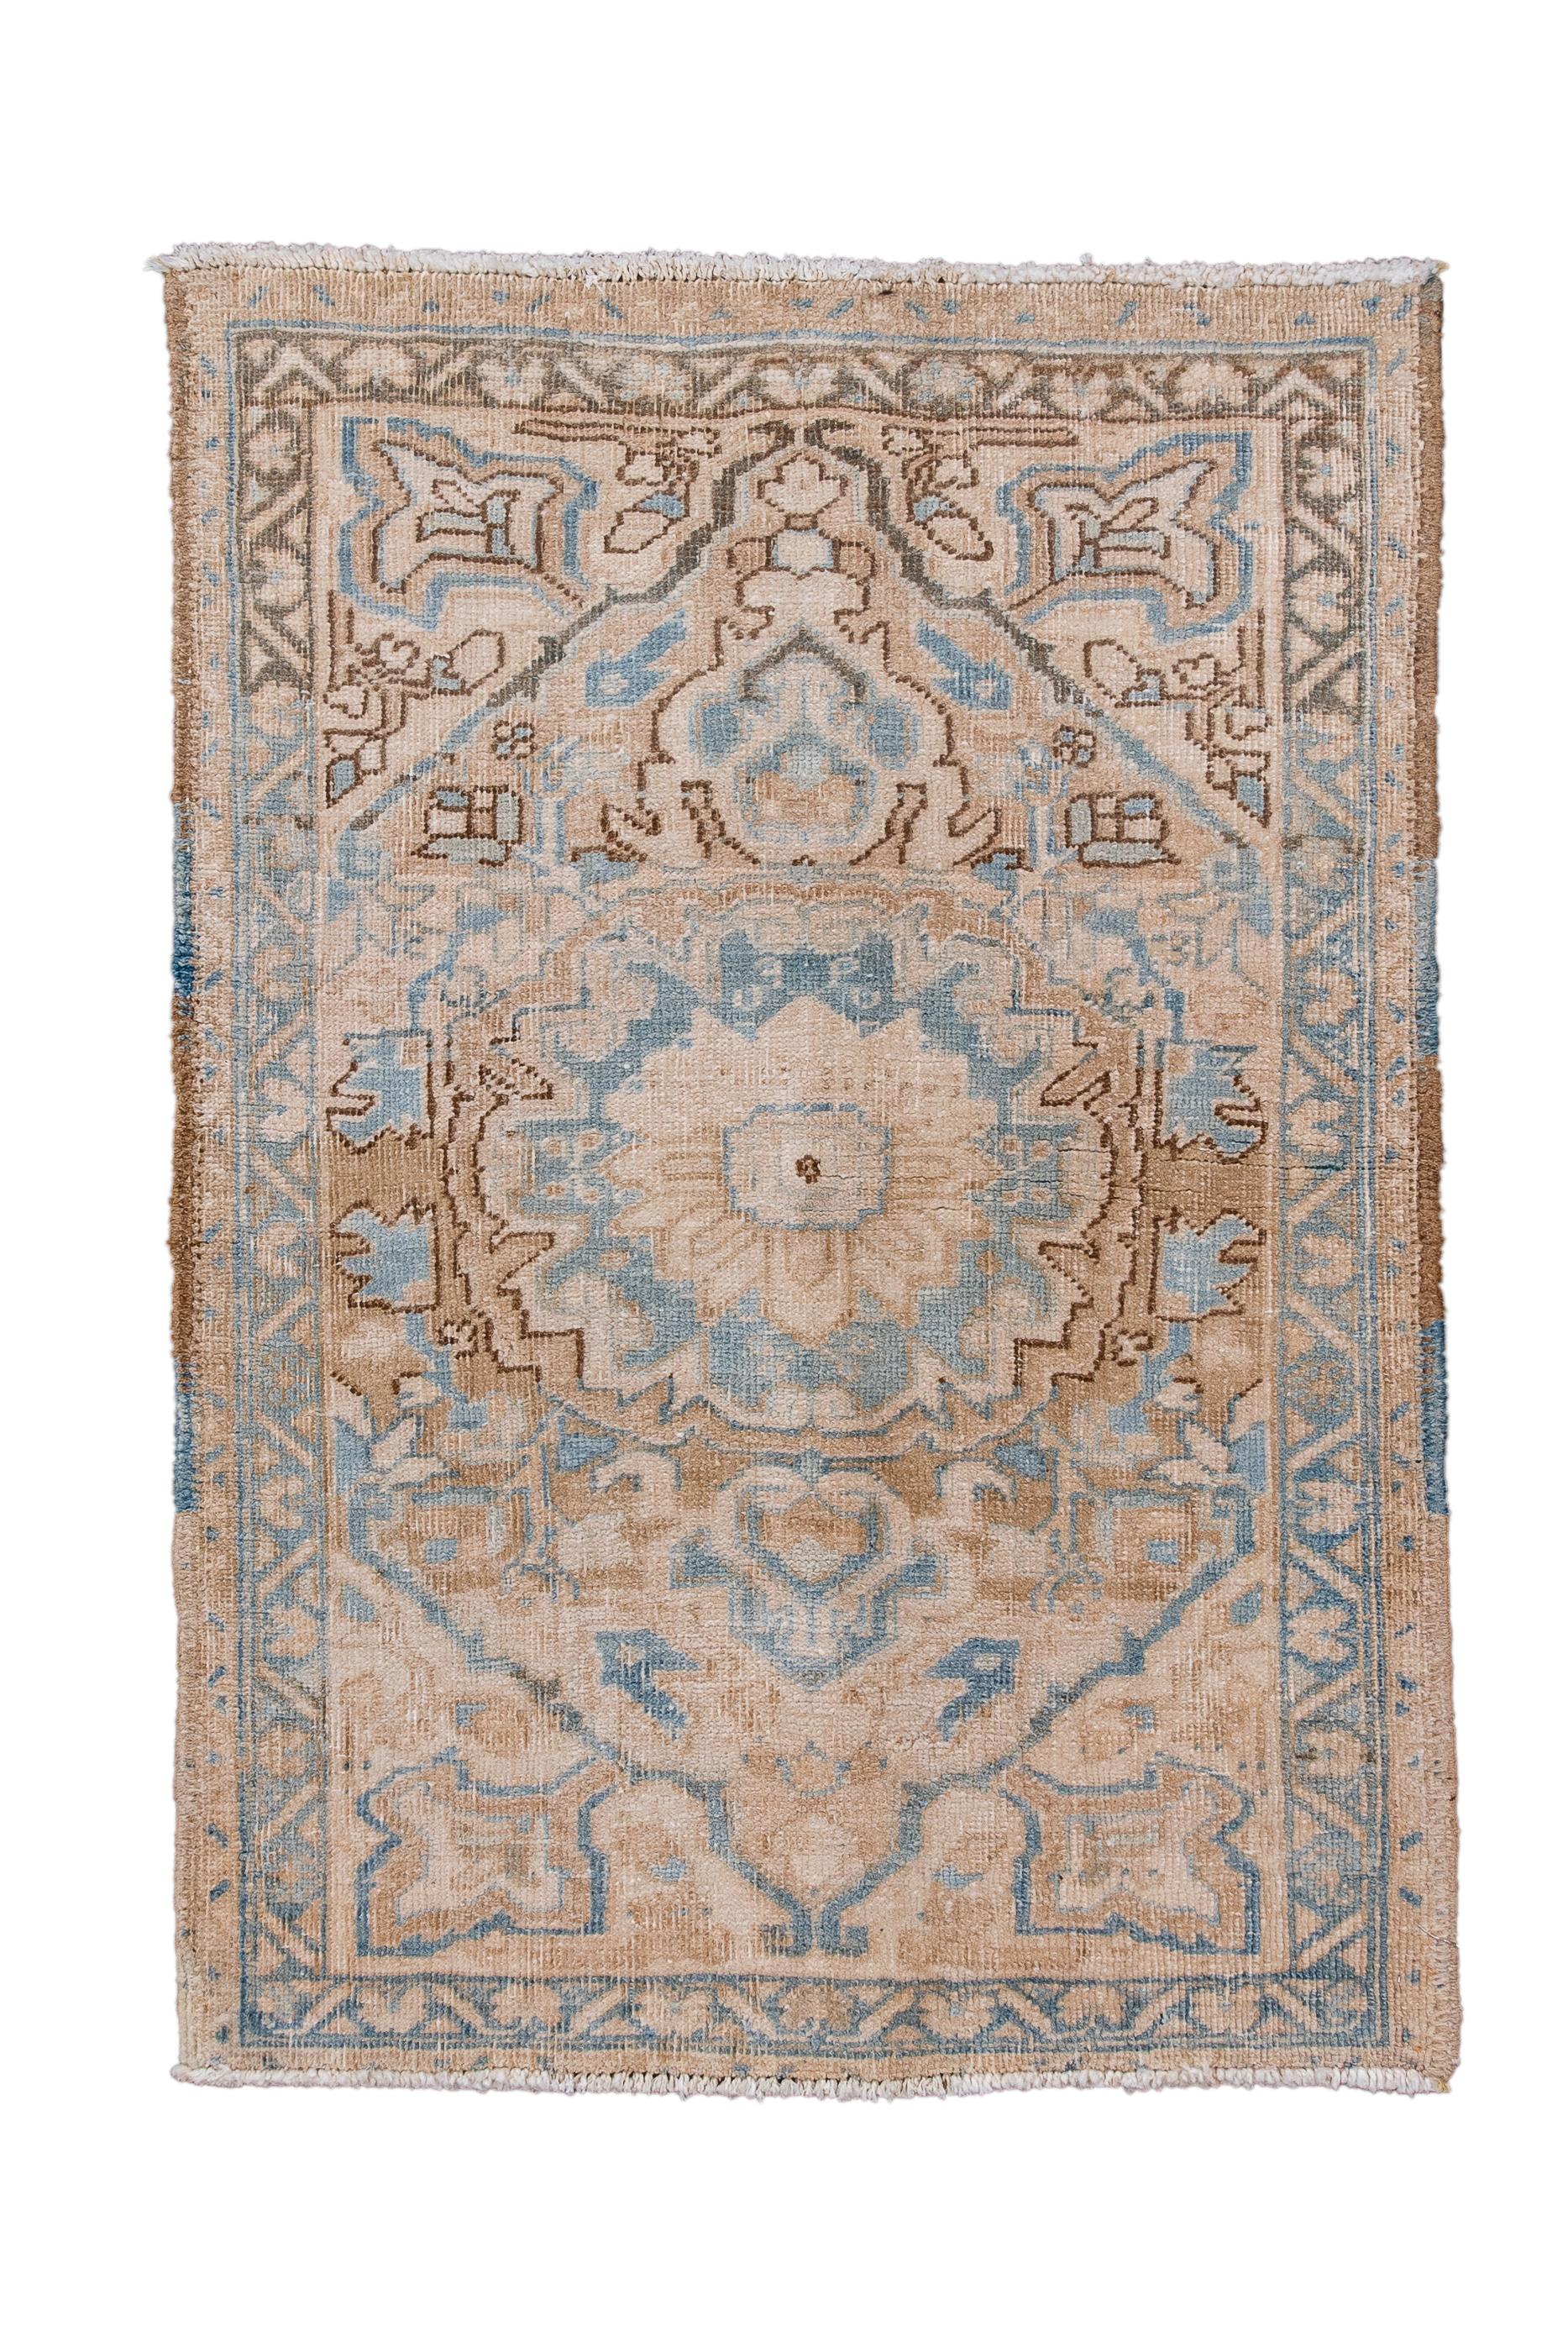 This diminutive rustic rug shows a muted palette of rust,  pale blue and cream, expressed in a lobed and pendanted medallion set on a pointed field with pointed, radiating floral corners. Abrashed blue border with reversing fan palmettes.